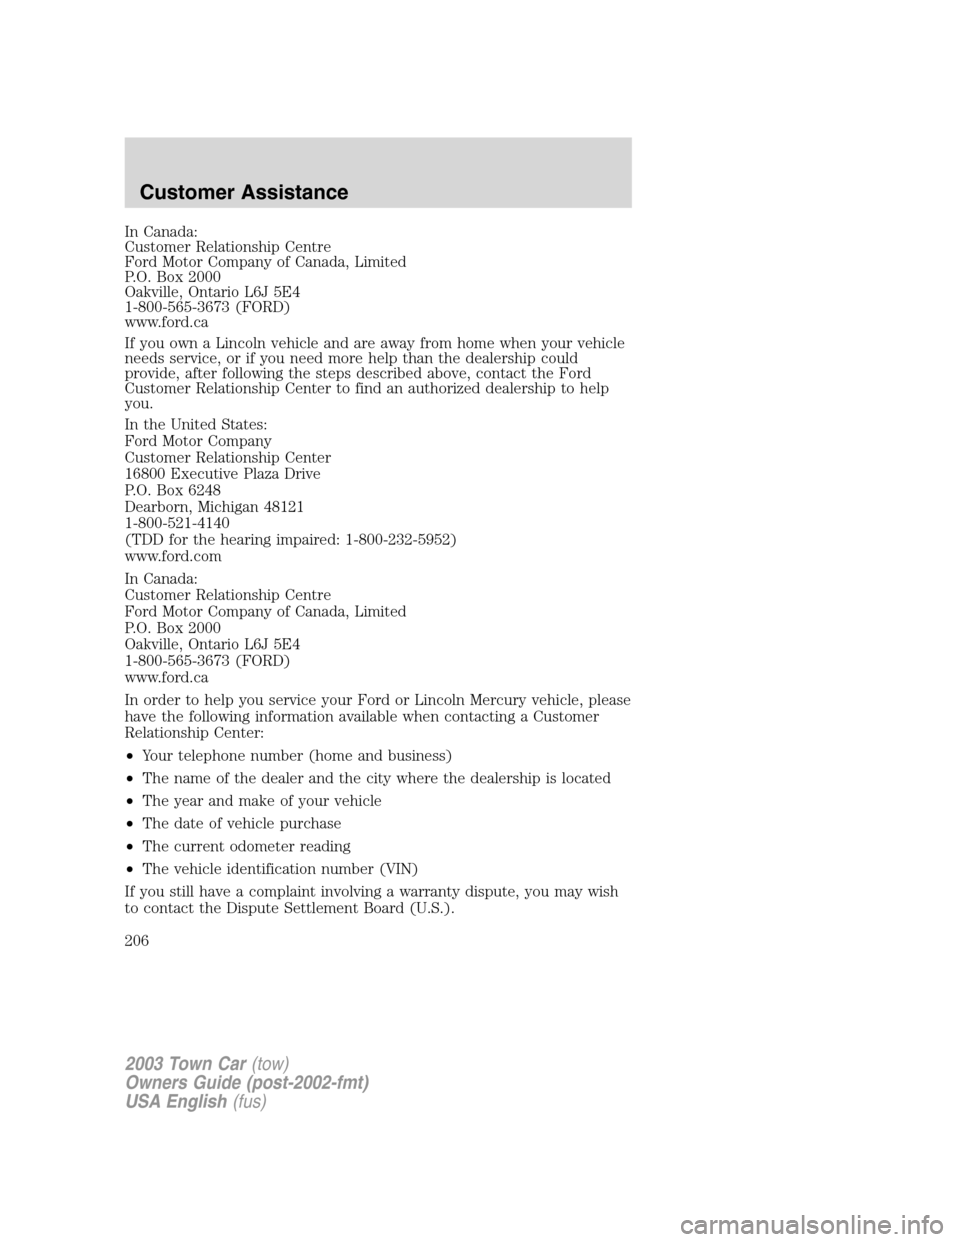 LINCOLN TOWN CAR 2003 User Guide In Canada:
Customer Relationship Centre
Ford Motor Company of Canada, Limited
P.O. Box 2000
Oakville, Ontario L6J 5E4
1-800-565-3673 (FORD)
www.ford.ca
If you own a Lincoln vehicle and are away from h